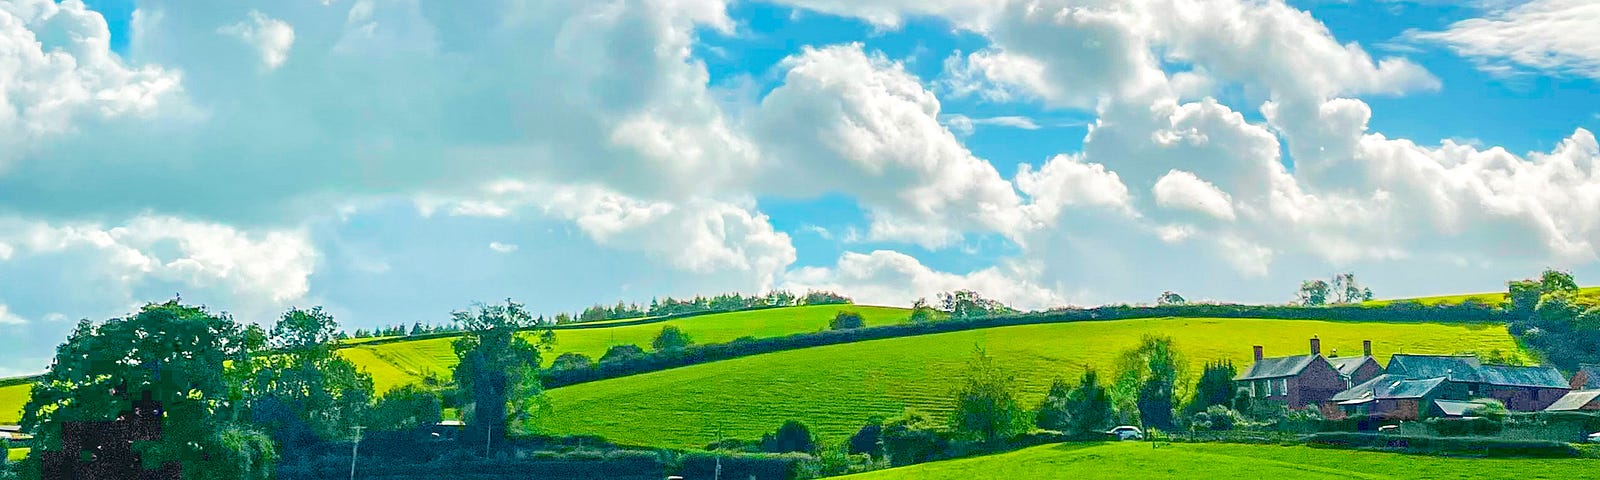 Green rolling hills with a red farmhouse in the distance, sheep in the forground, and the sky is full of white fluffy clouds.